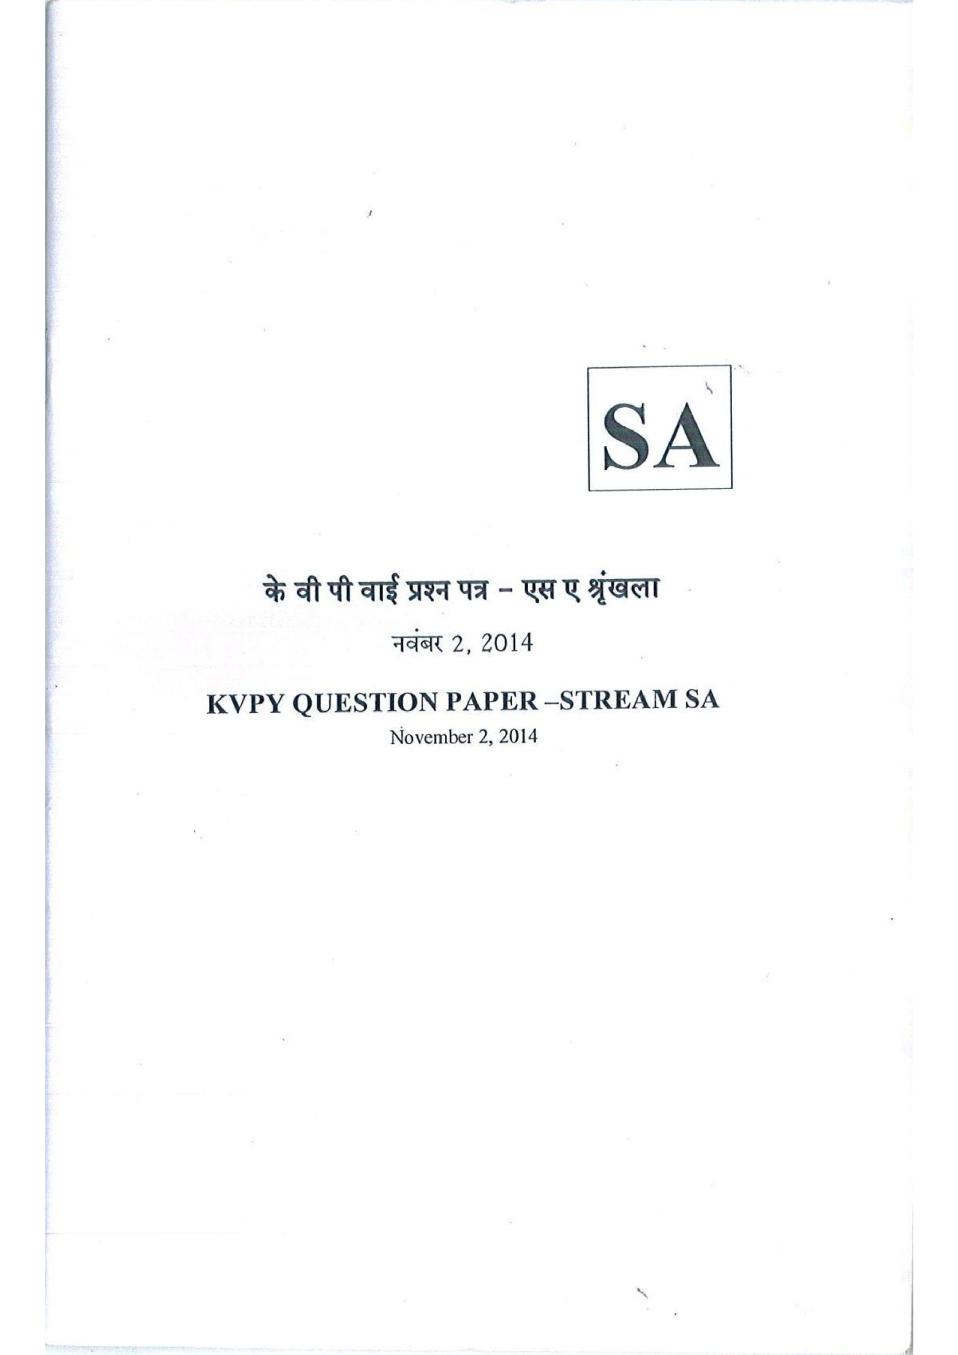 KVPY 2014 Question Paper with Answer Key for SA Stream (Hindi Version) - Page 1